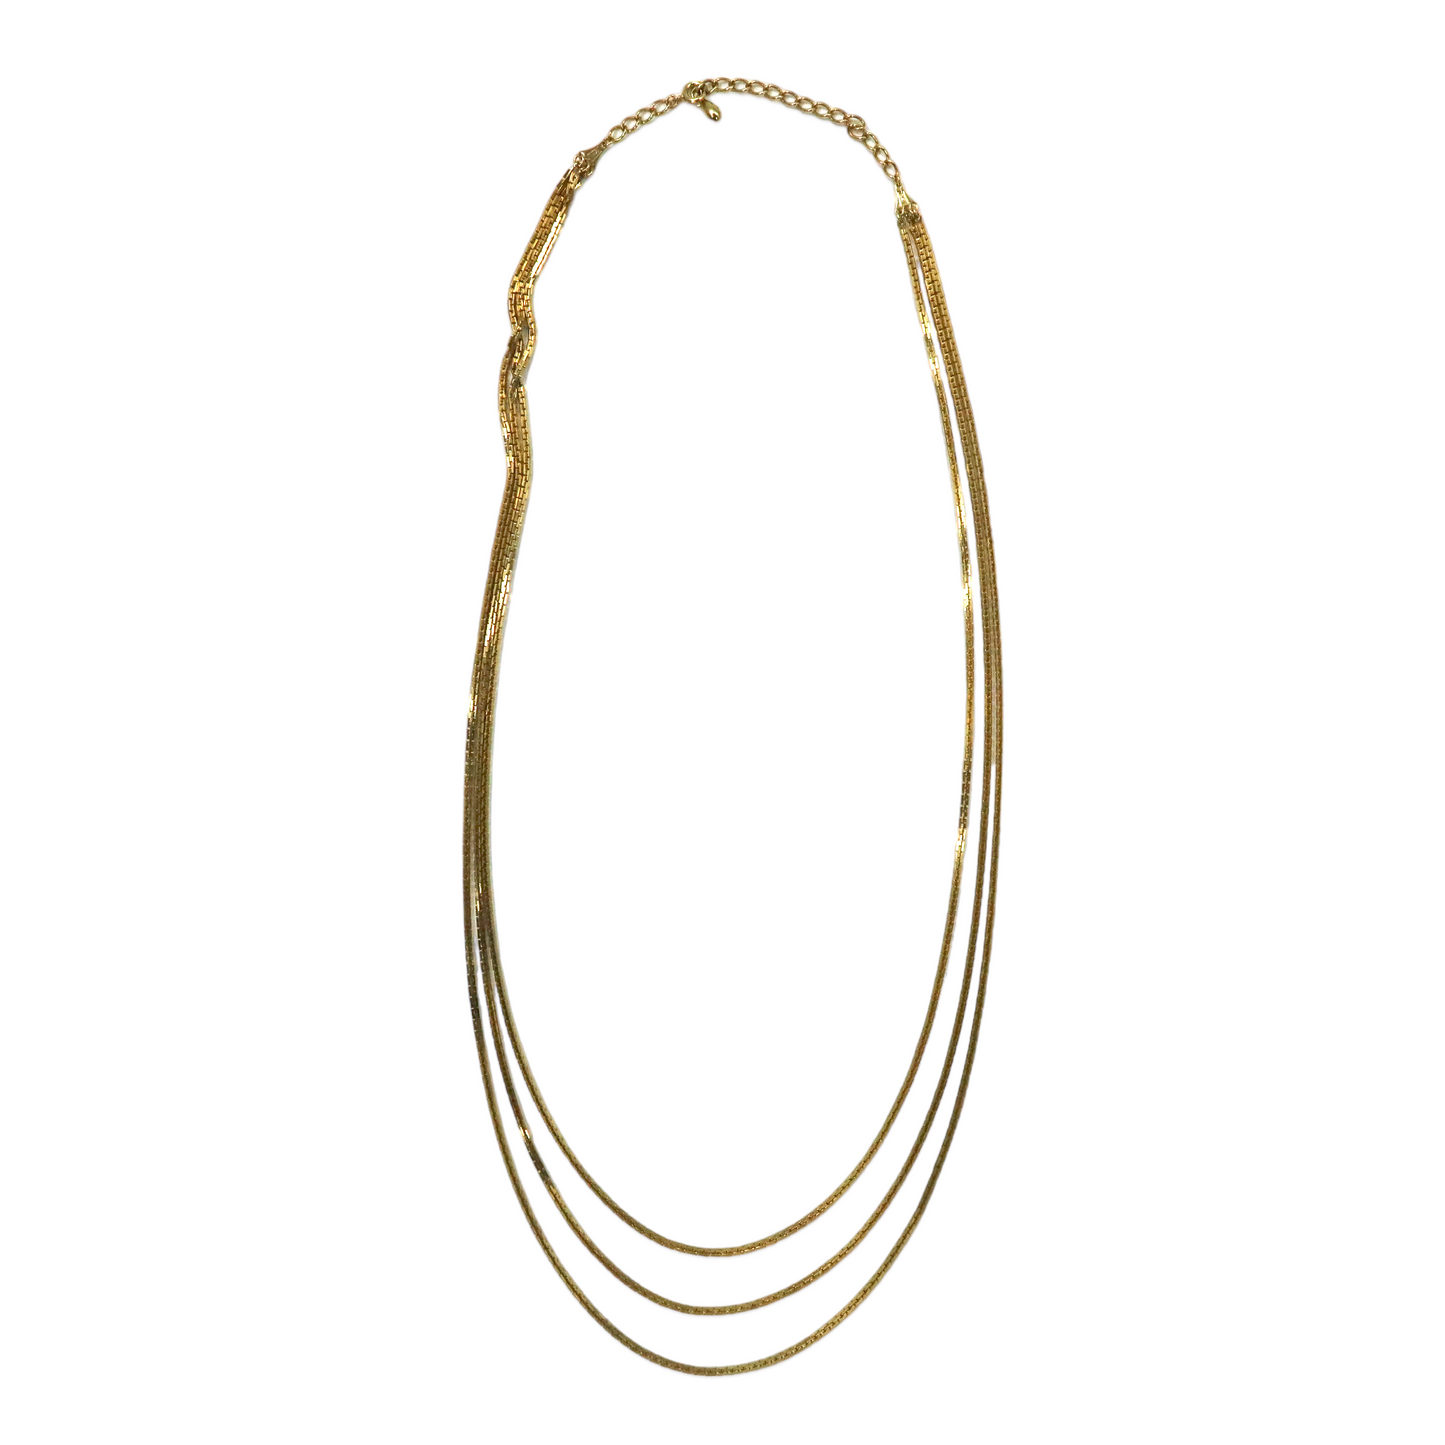 VINTAGE Gold Chain Necklaces 3連 ゴールドチェーンネックレス 80cm